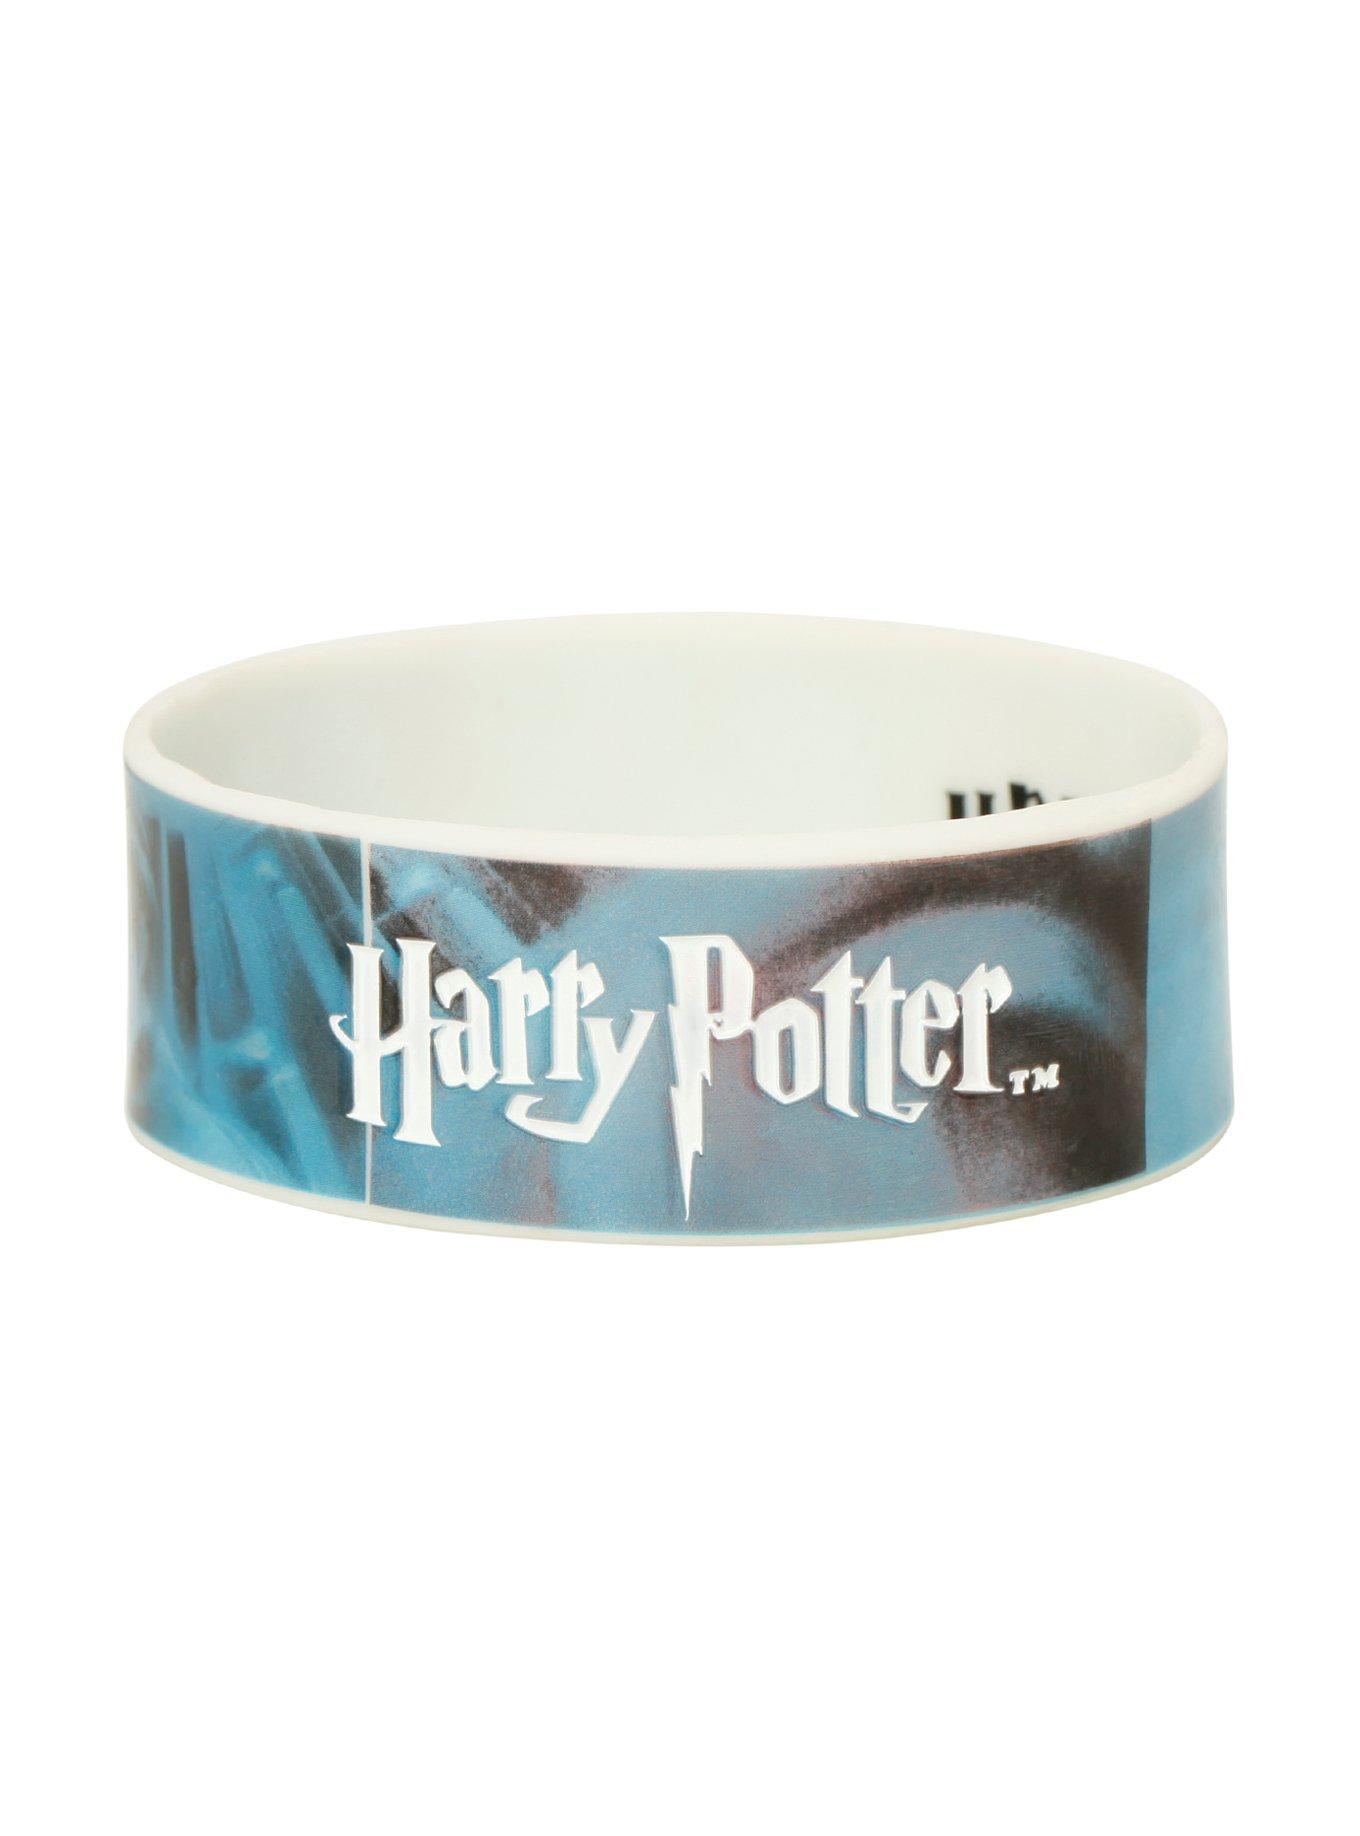 Harry Potter And The Order Of The Phoenix Rubber Bracelet, , hi-res